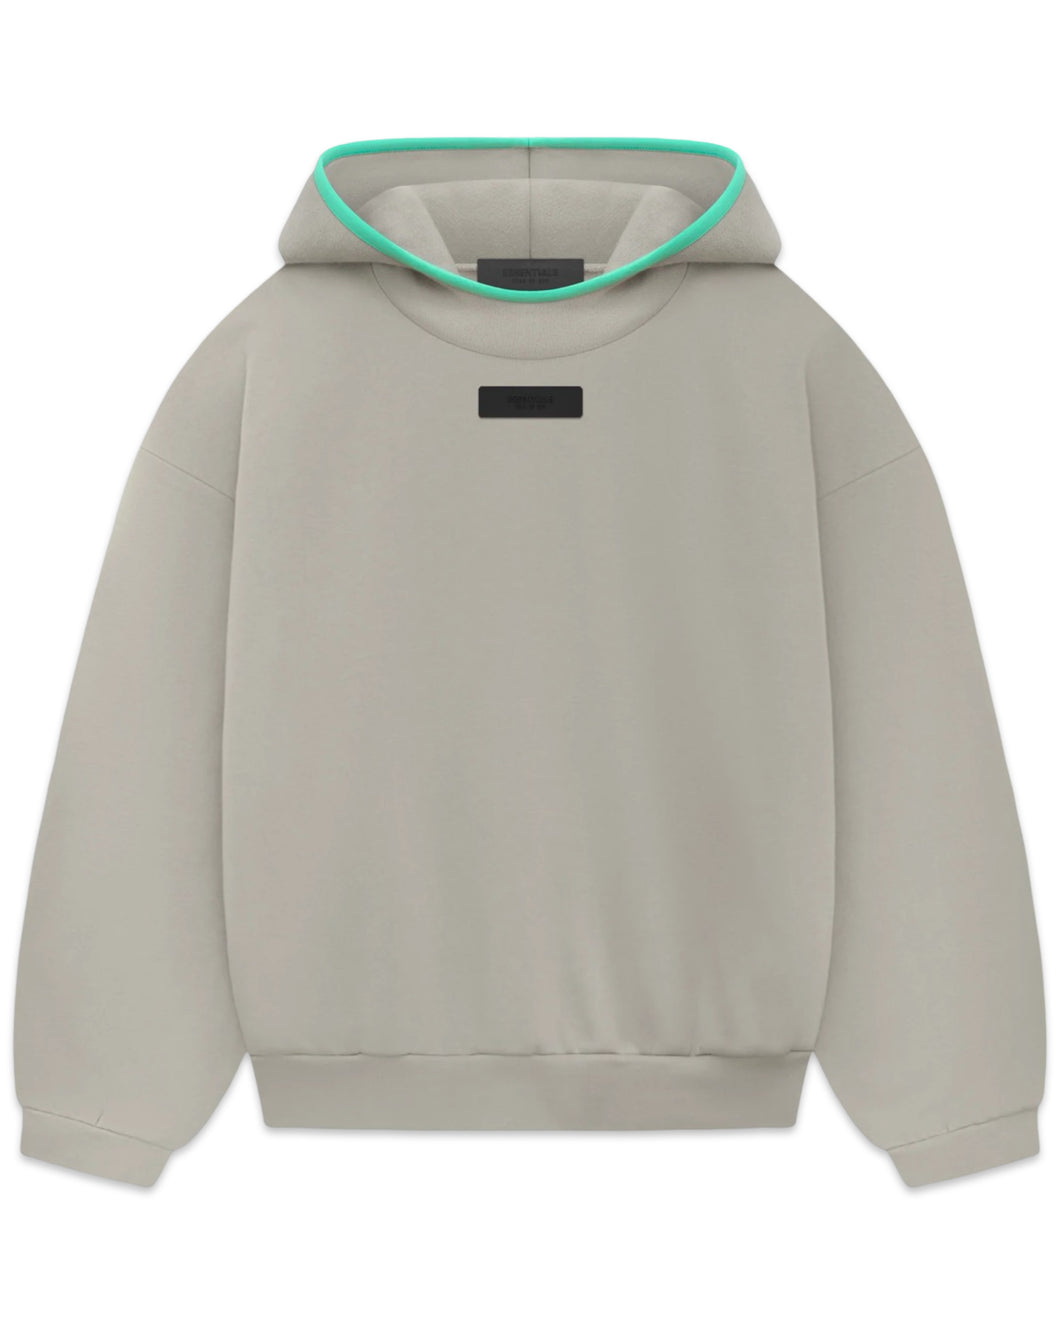 Essentials Fear of God Hooded Jumper in Seal